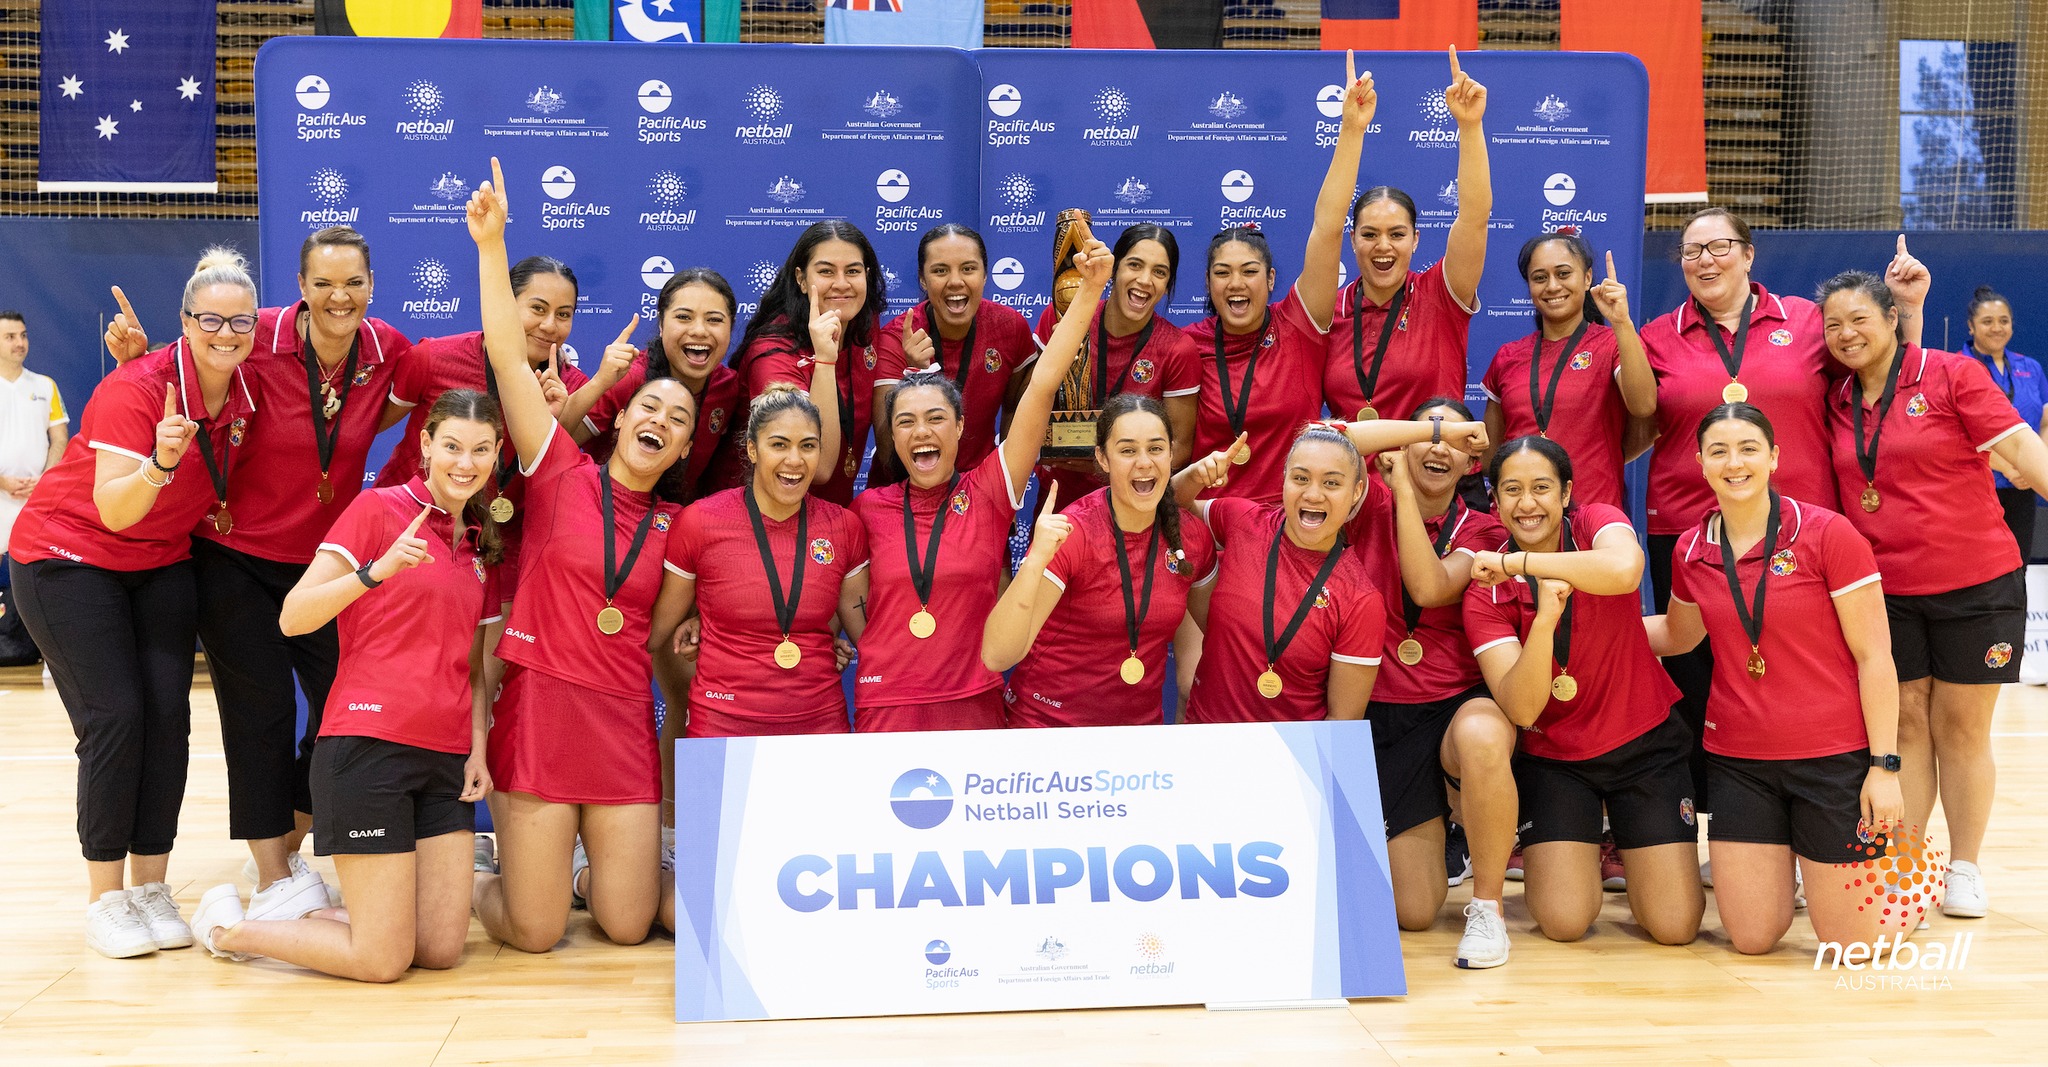 Tala's most recent accomplishment, claiming the PacificAus Sports Netball Series. Image: via Netball Australia Facebook